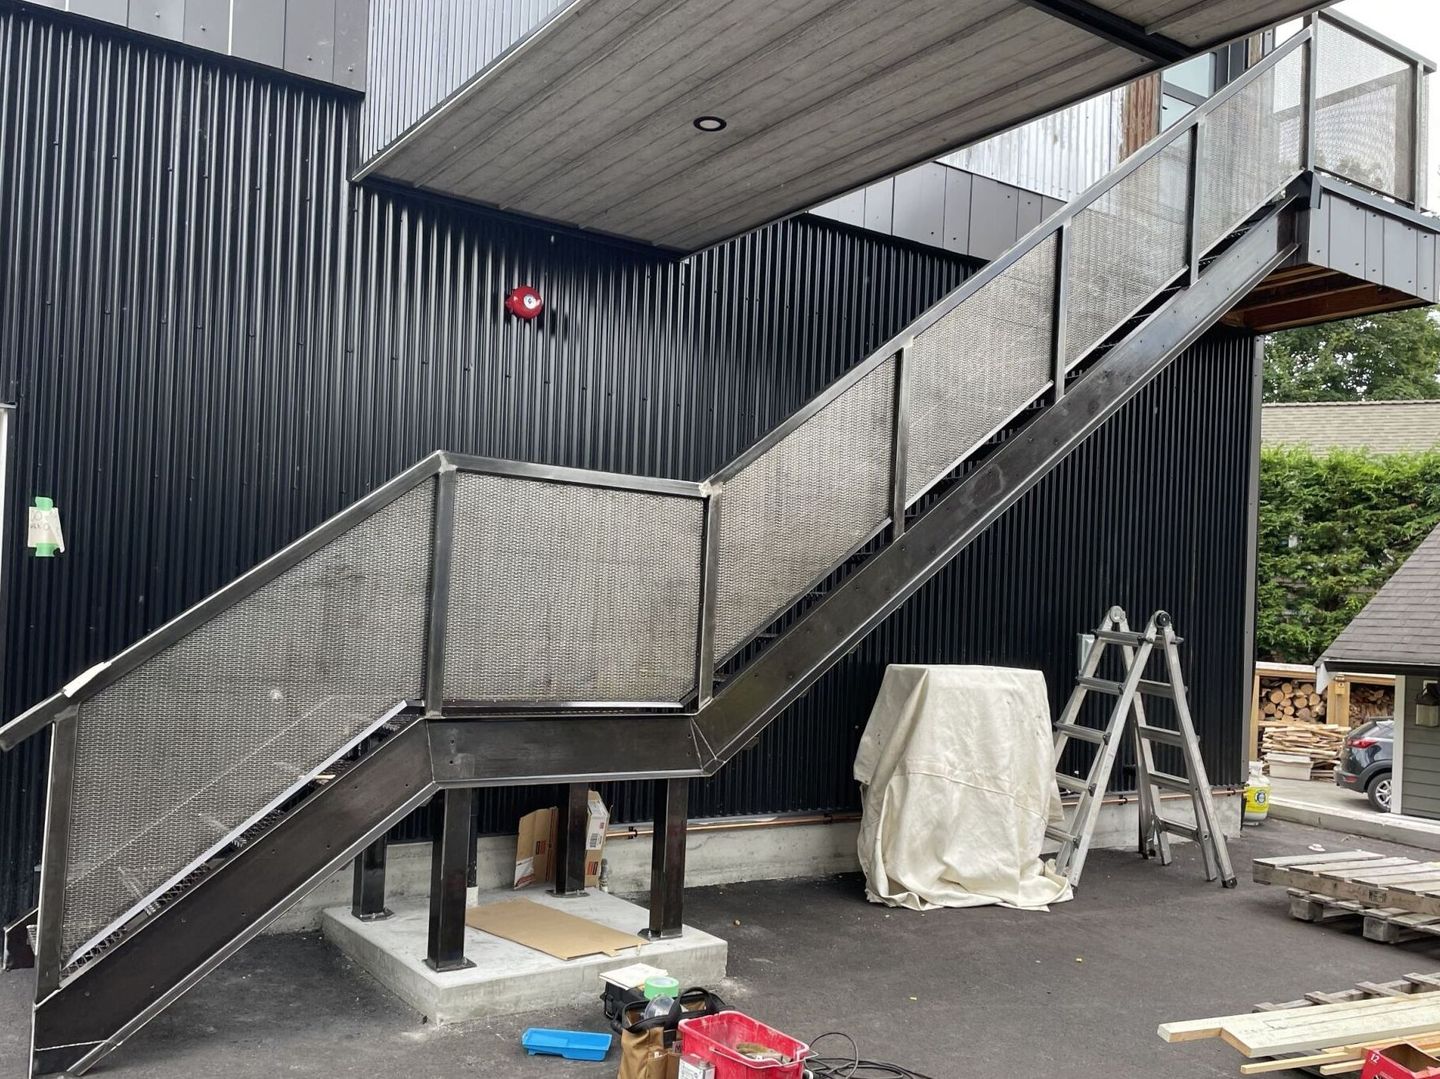 Vancouver Fabricators builds exterior staircases